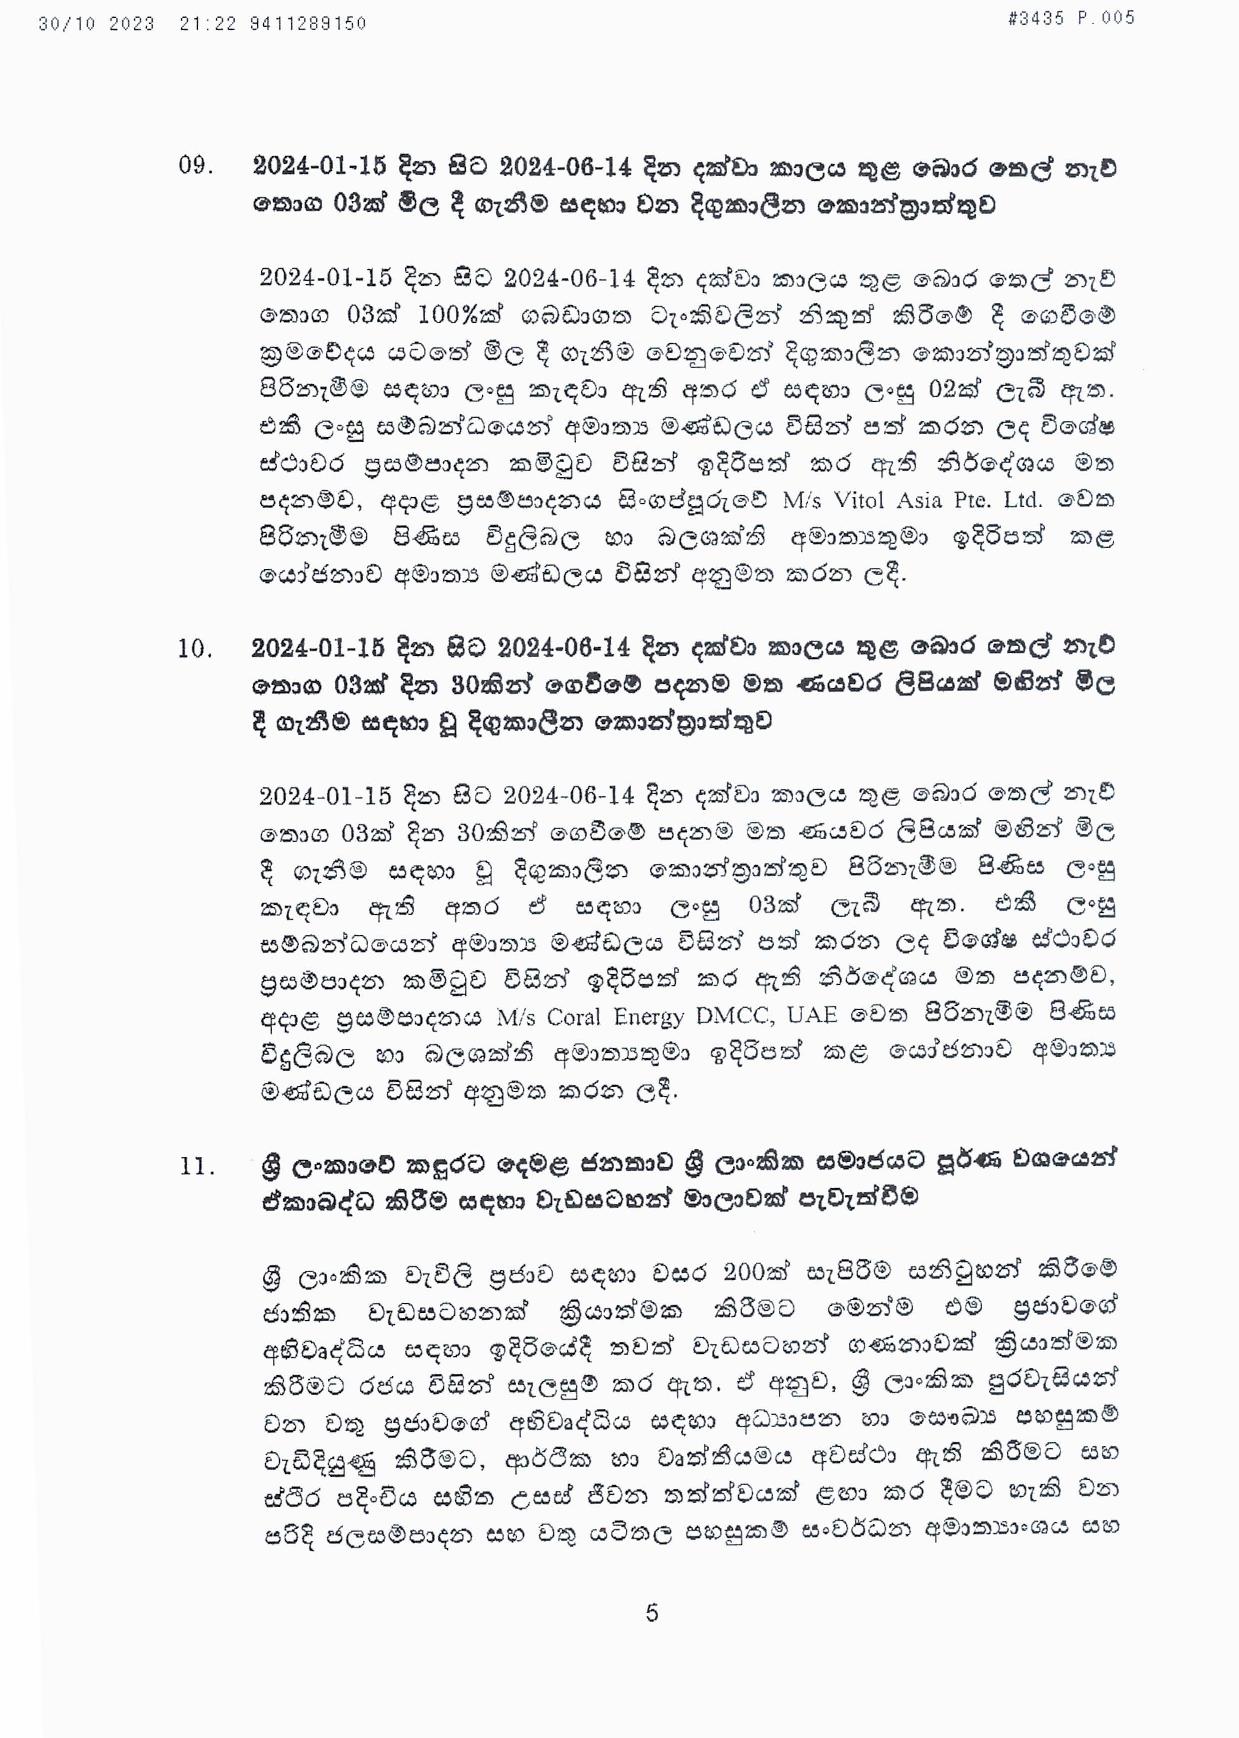 Cabinet Decisions on 30.10.2023 page 005